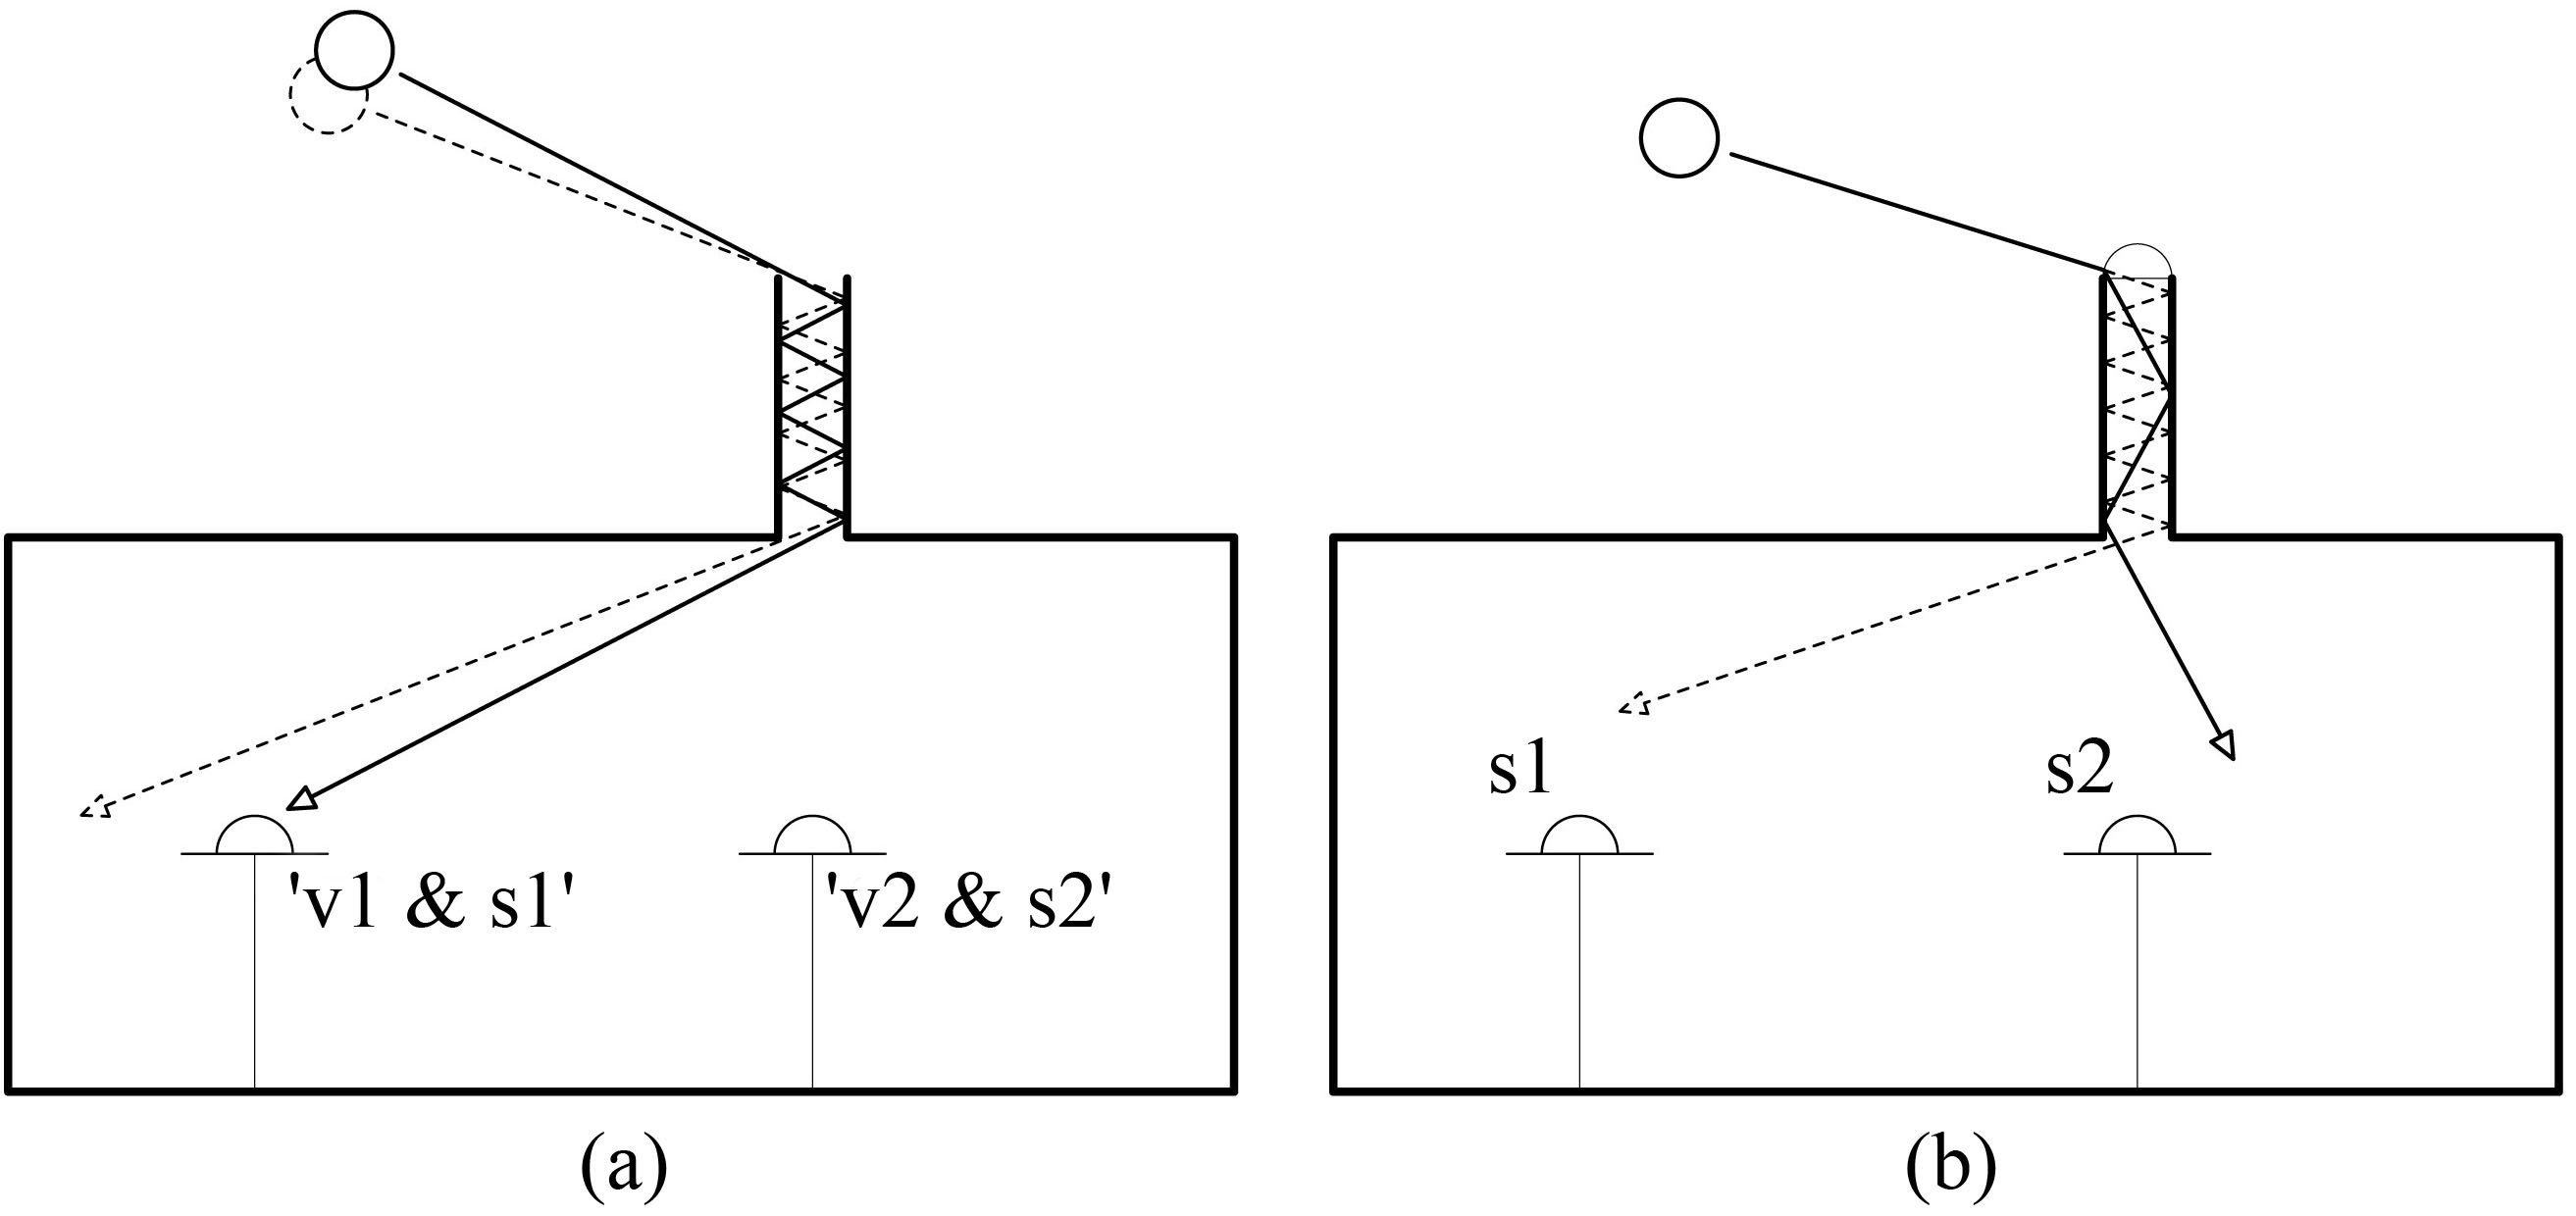 (a) Diagram showing how a small variation of the solar angle can have a significant impact in the light reaching (diffusor ring pattern) the sensor. (b) Diagram showing how the lack of the characterization of the dome collector light bending properties causes overestimation in “s2” and underestimation in “s1”.